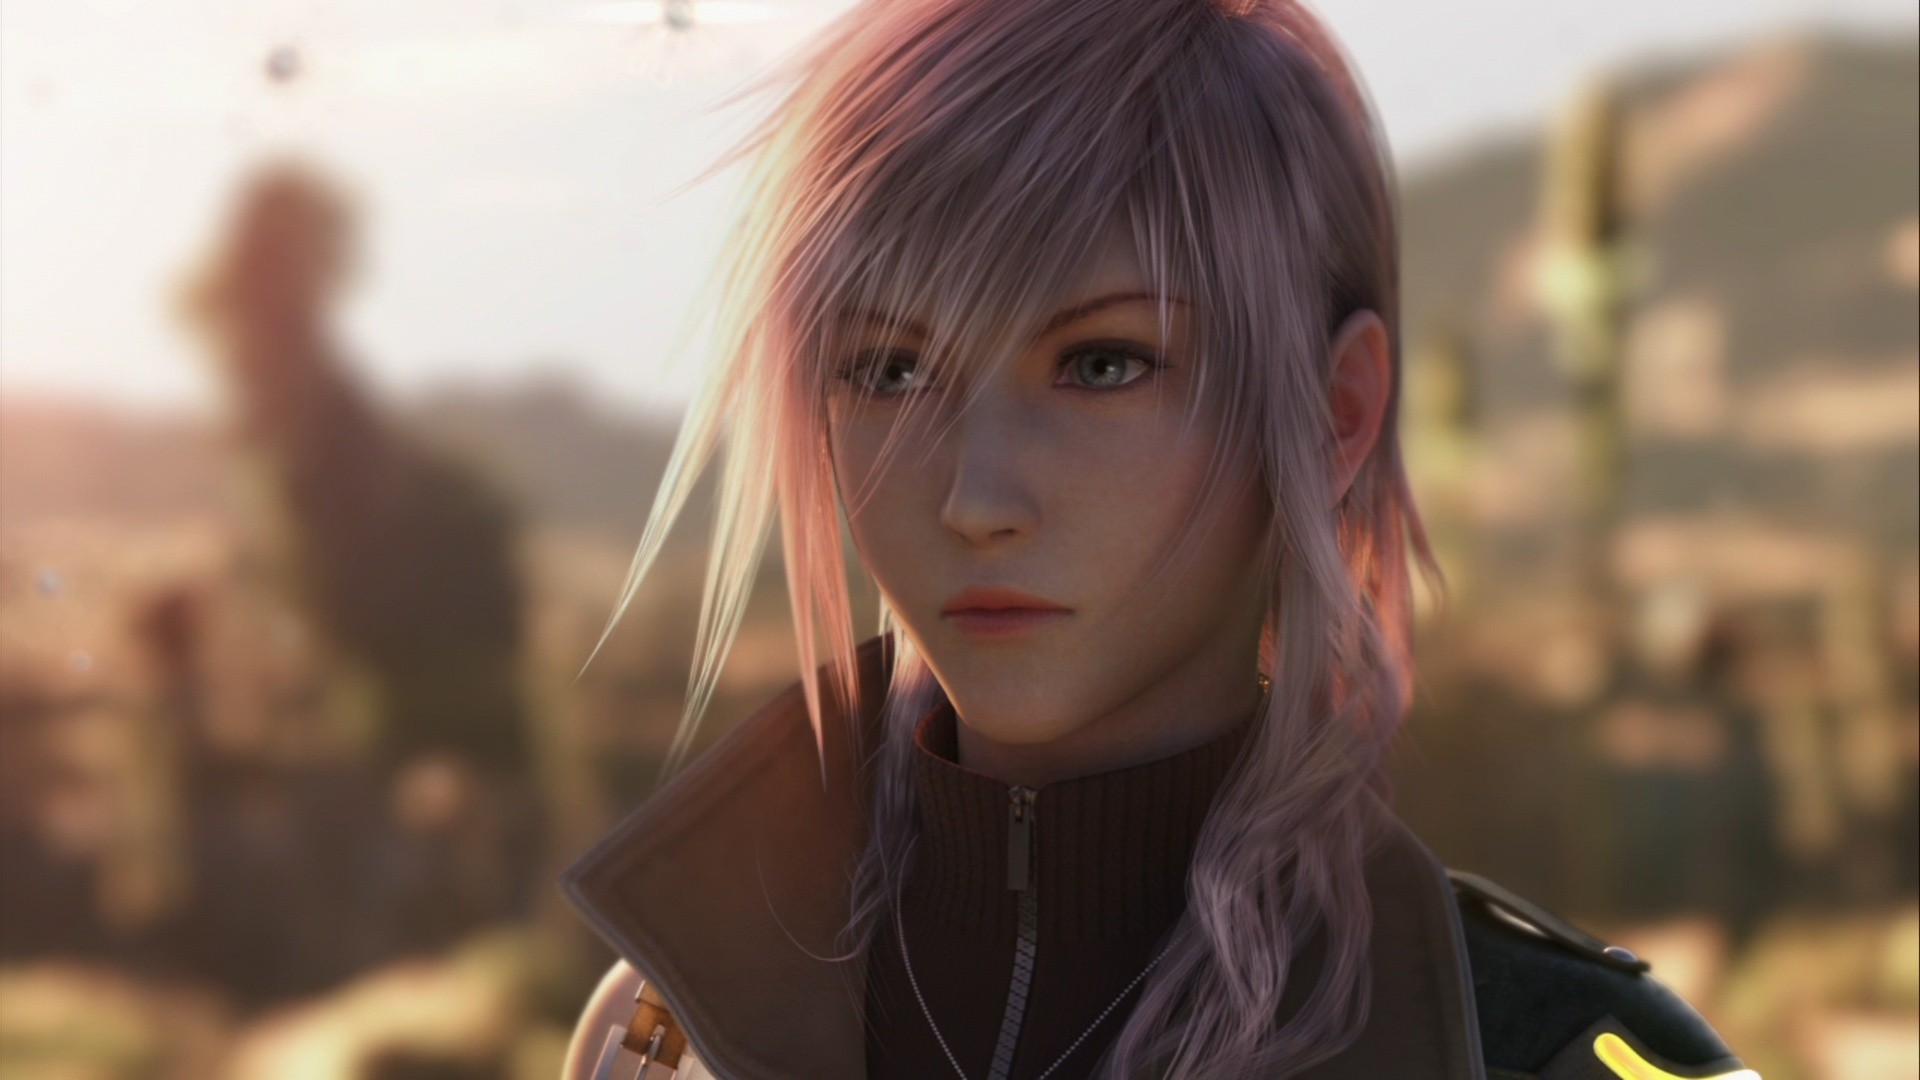 General 1920x1080 Claire Farron Final Fantasy XIII video games video game girls fantasy girl